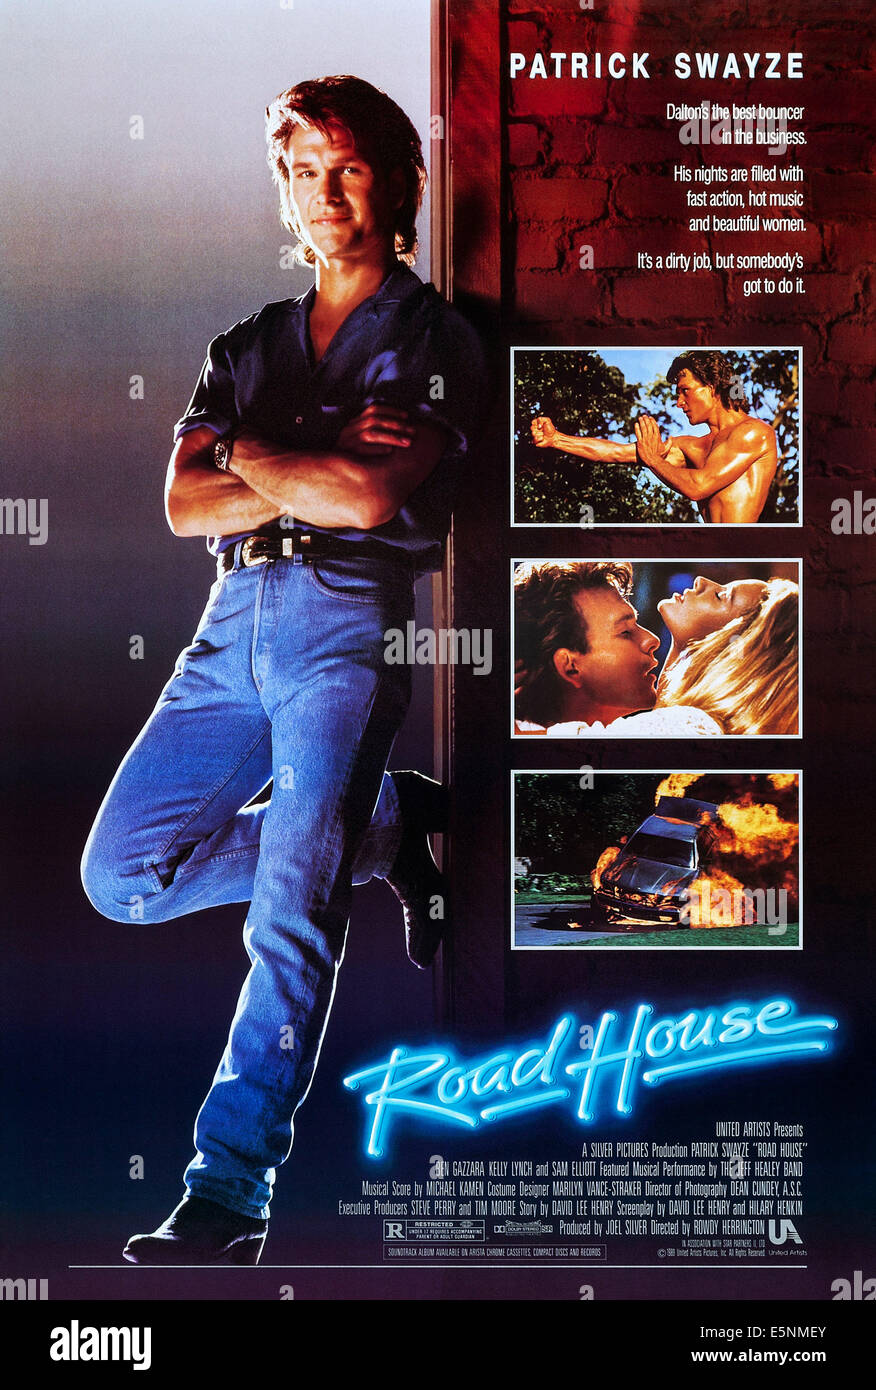 ROAD HOUSE, US poster, Patrick Swayze (left and front right), 1989, © United Artists/courtesy Stock Photo